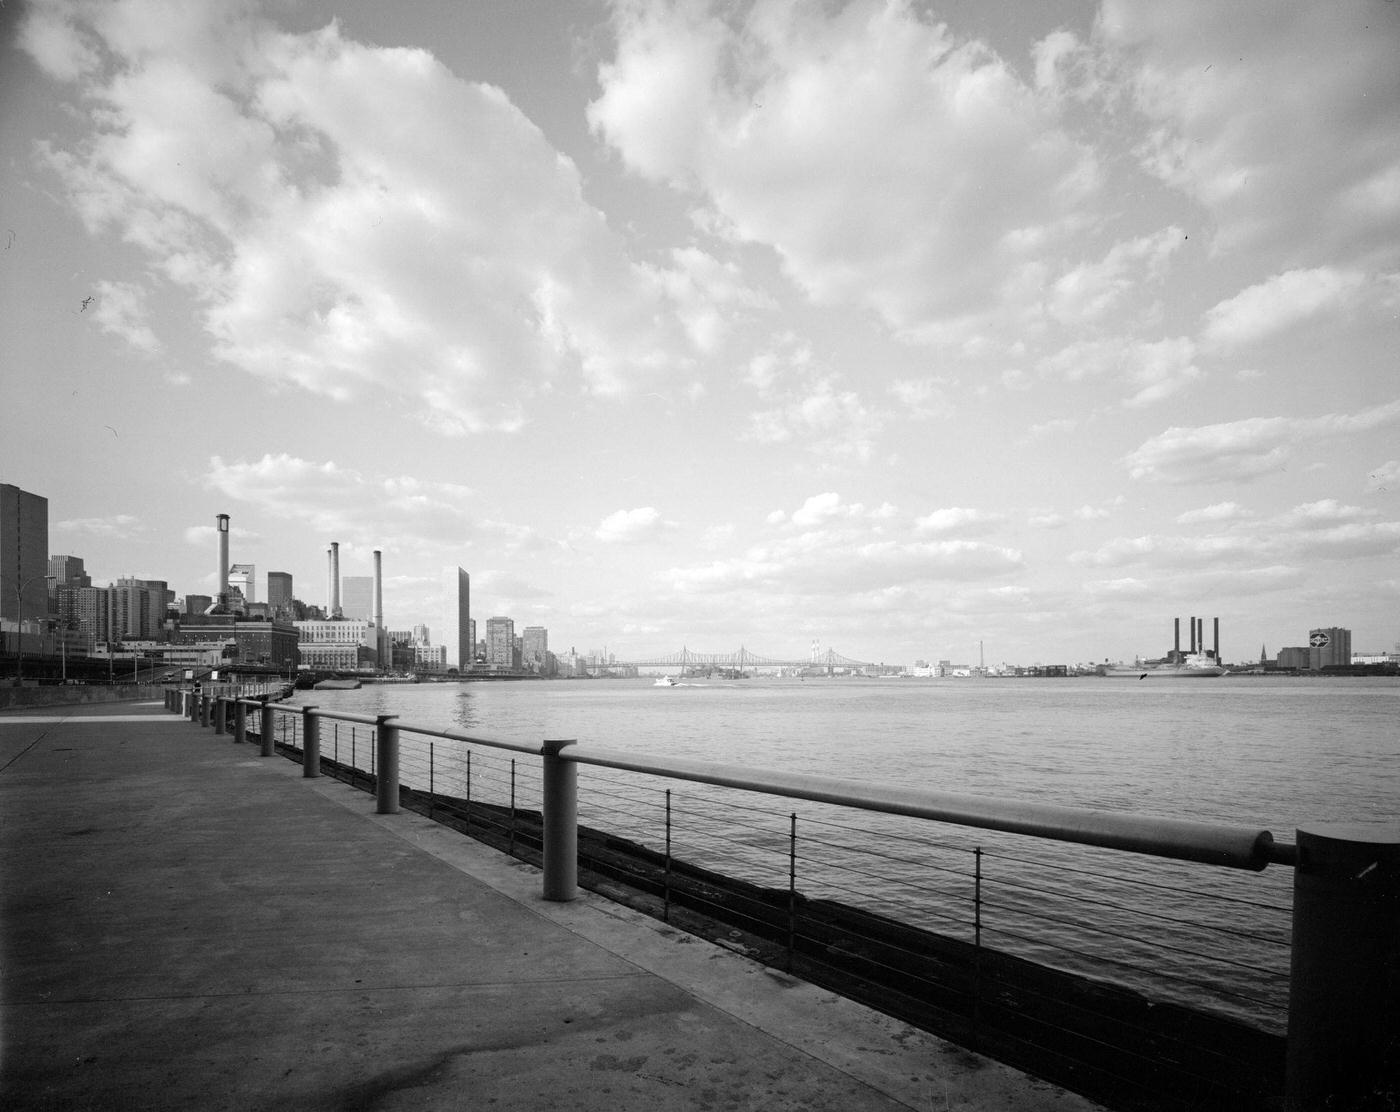 Looking North Over The East River From The East River Esplanade, Manhattan, 1980S